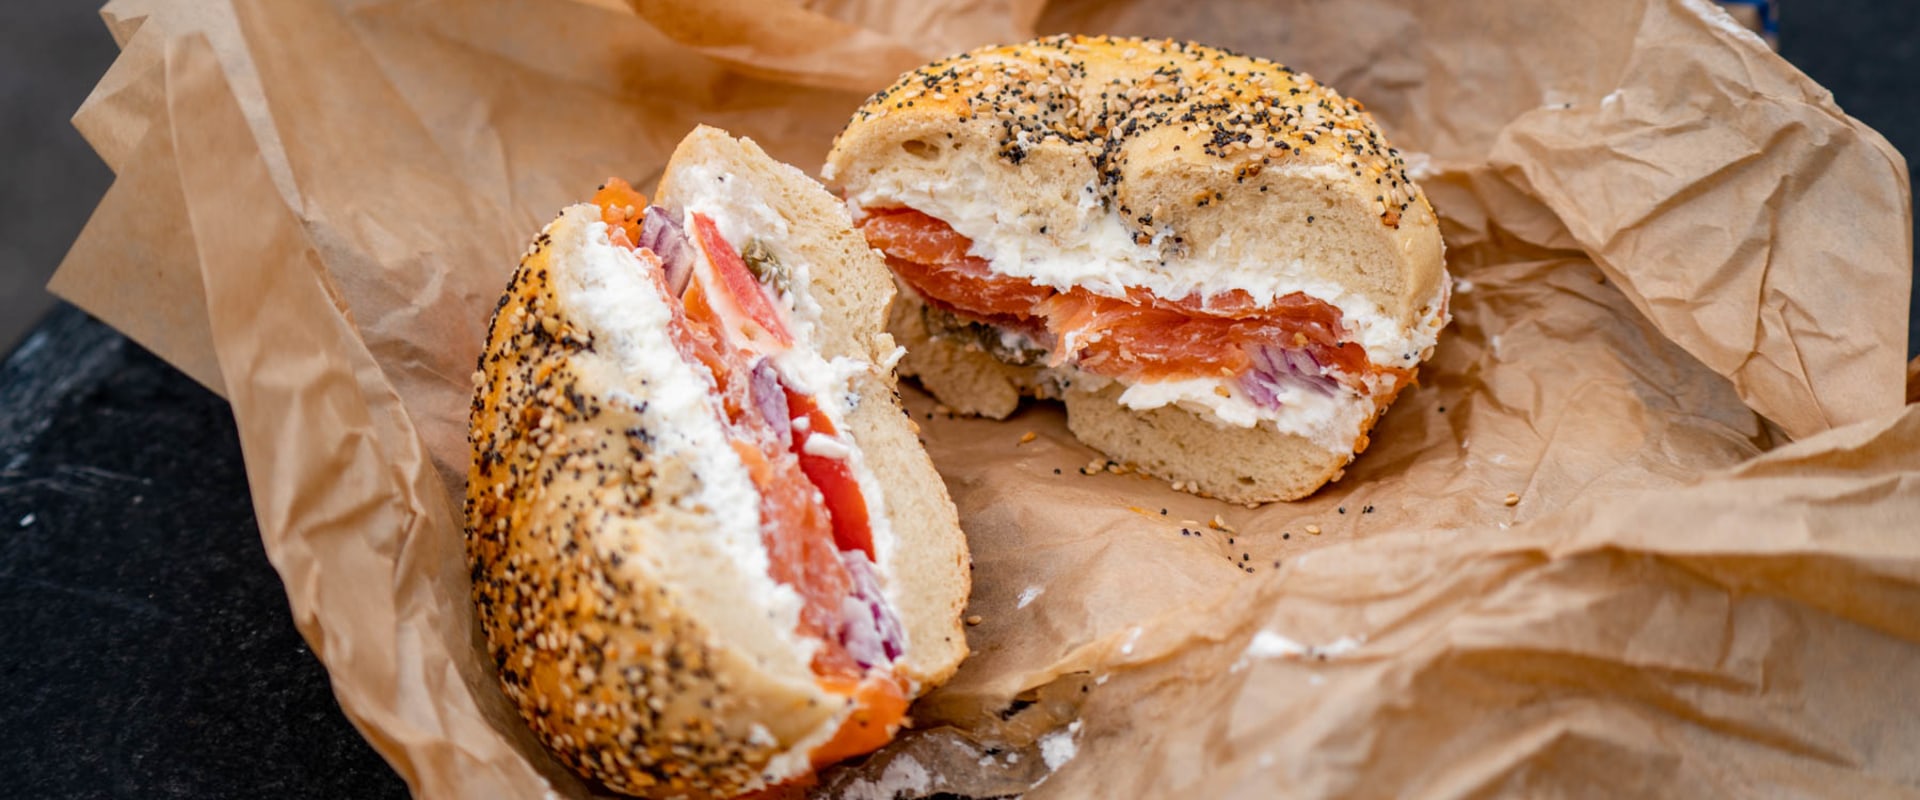 Exploring the Delicious Cream Cheese Options at Bagel Shops in Brooklyn, New York